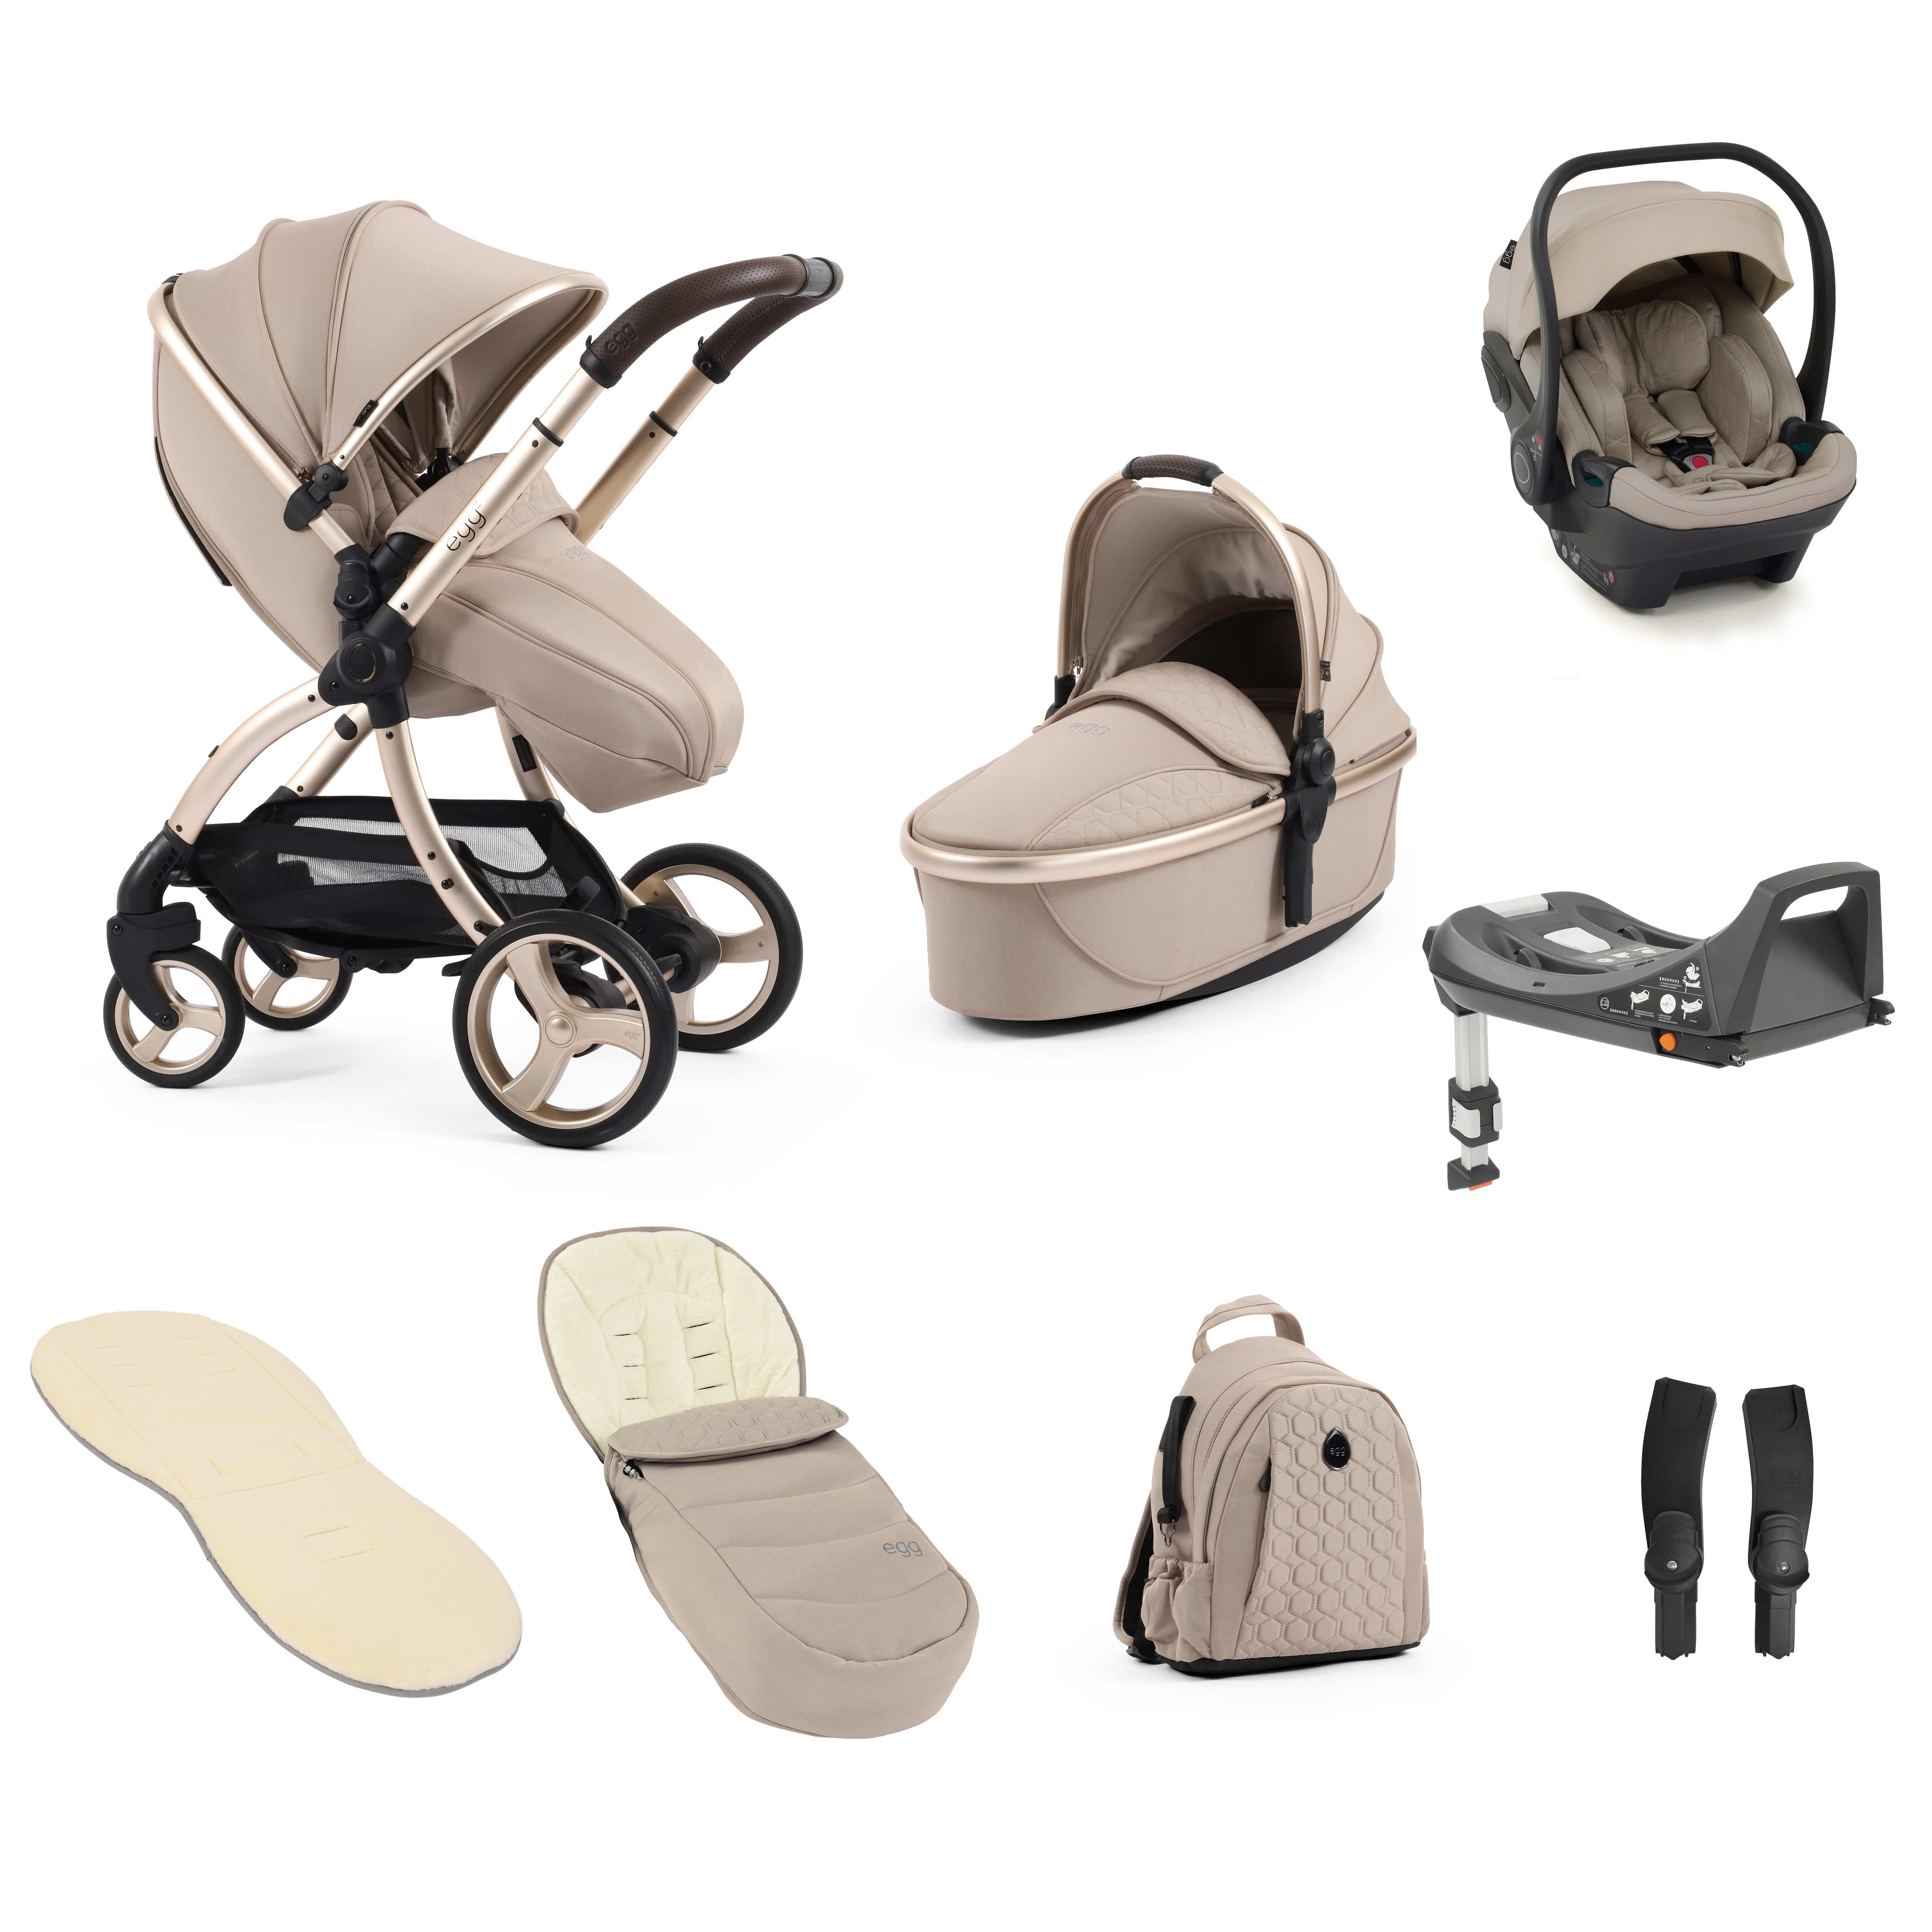 egg3 Luxury Travel System Bundle Feather Baby Prams 14722-FTH 5060711567907